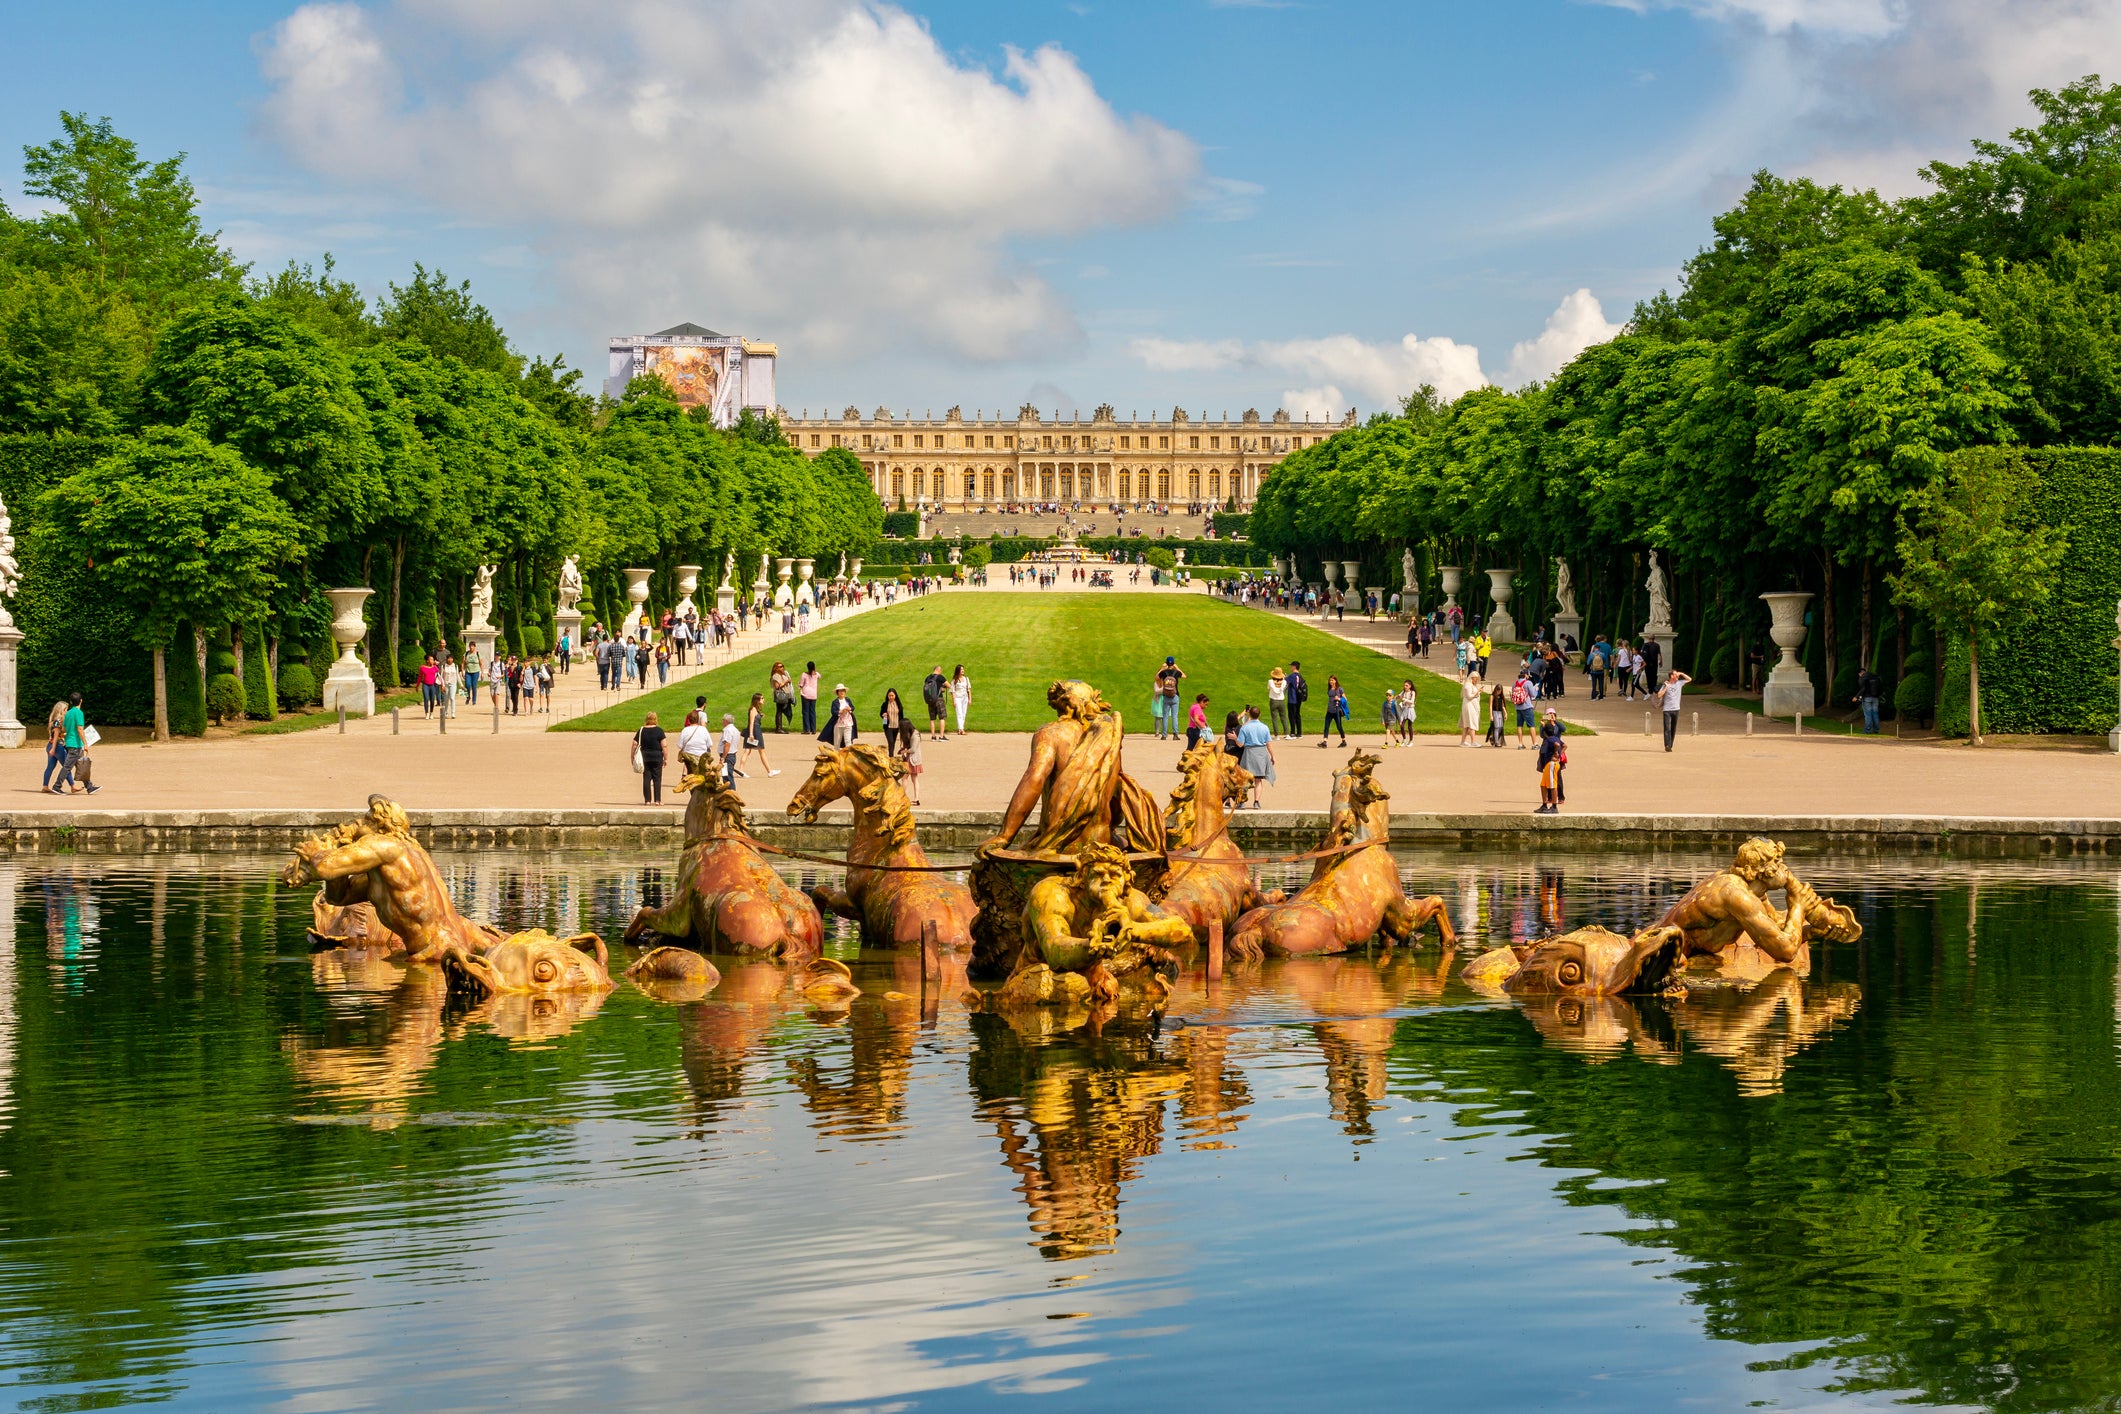 The Palace of Versailles was built in the 17th century for King Louis XIV